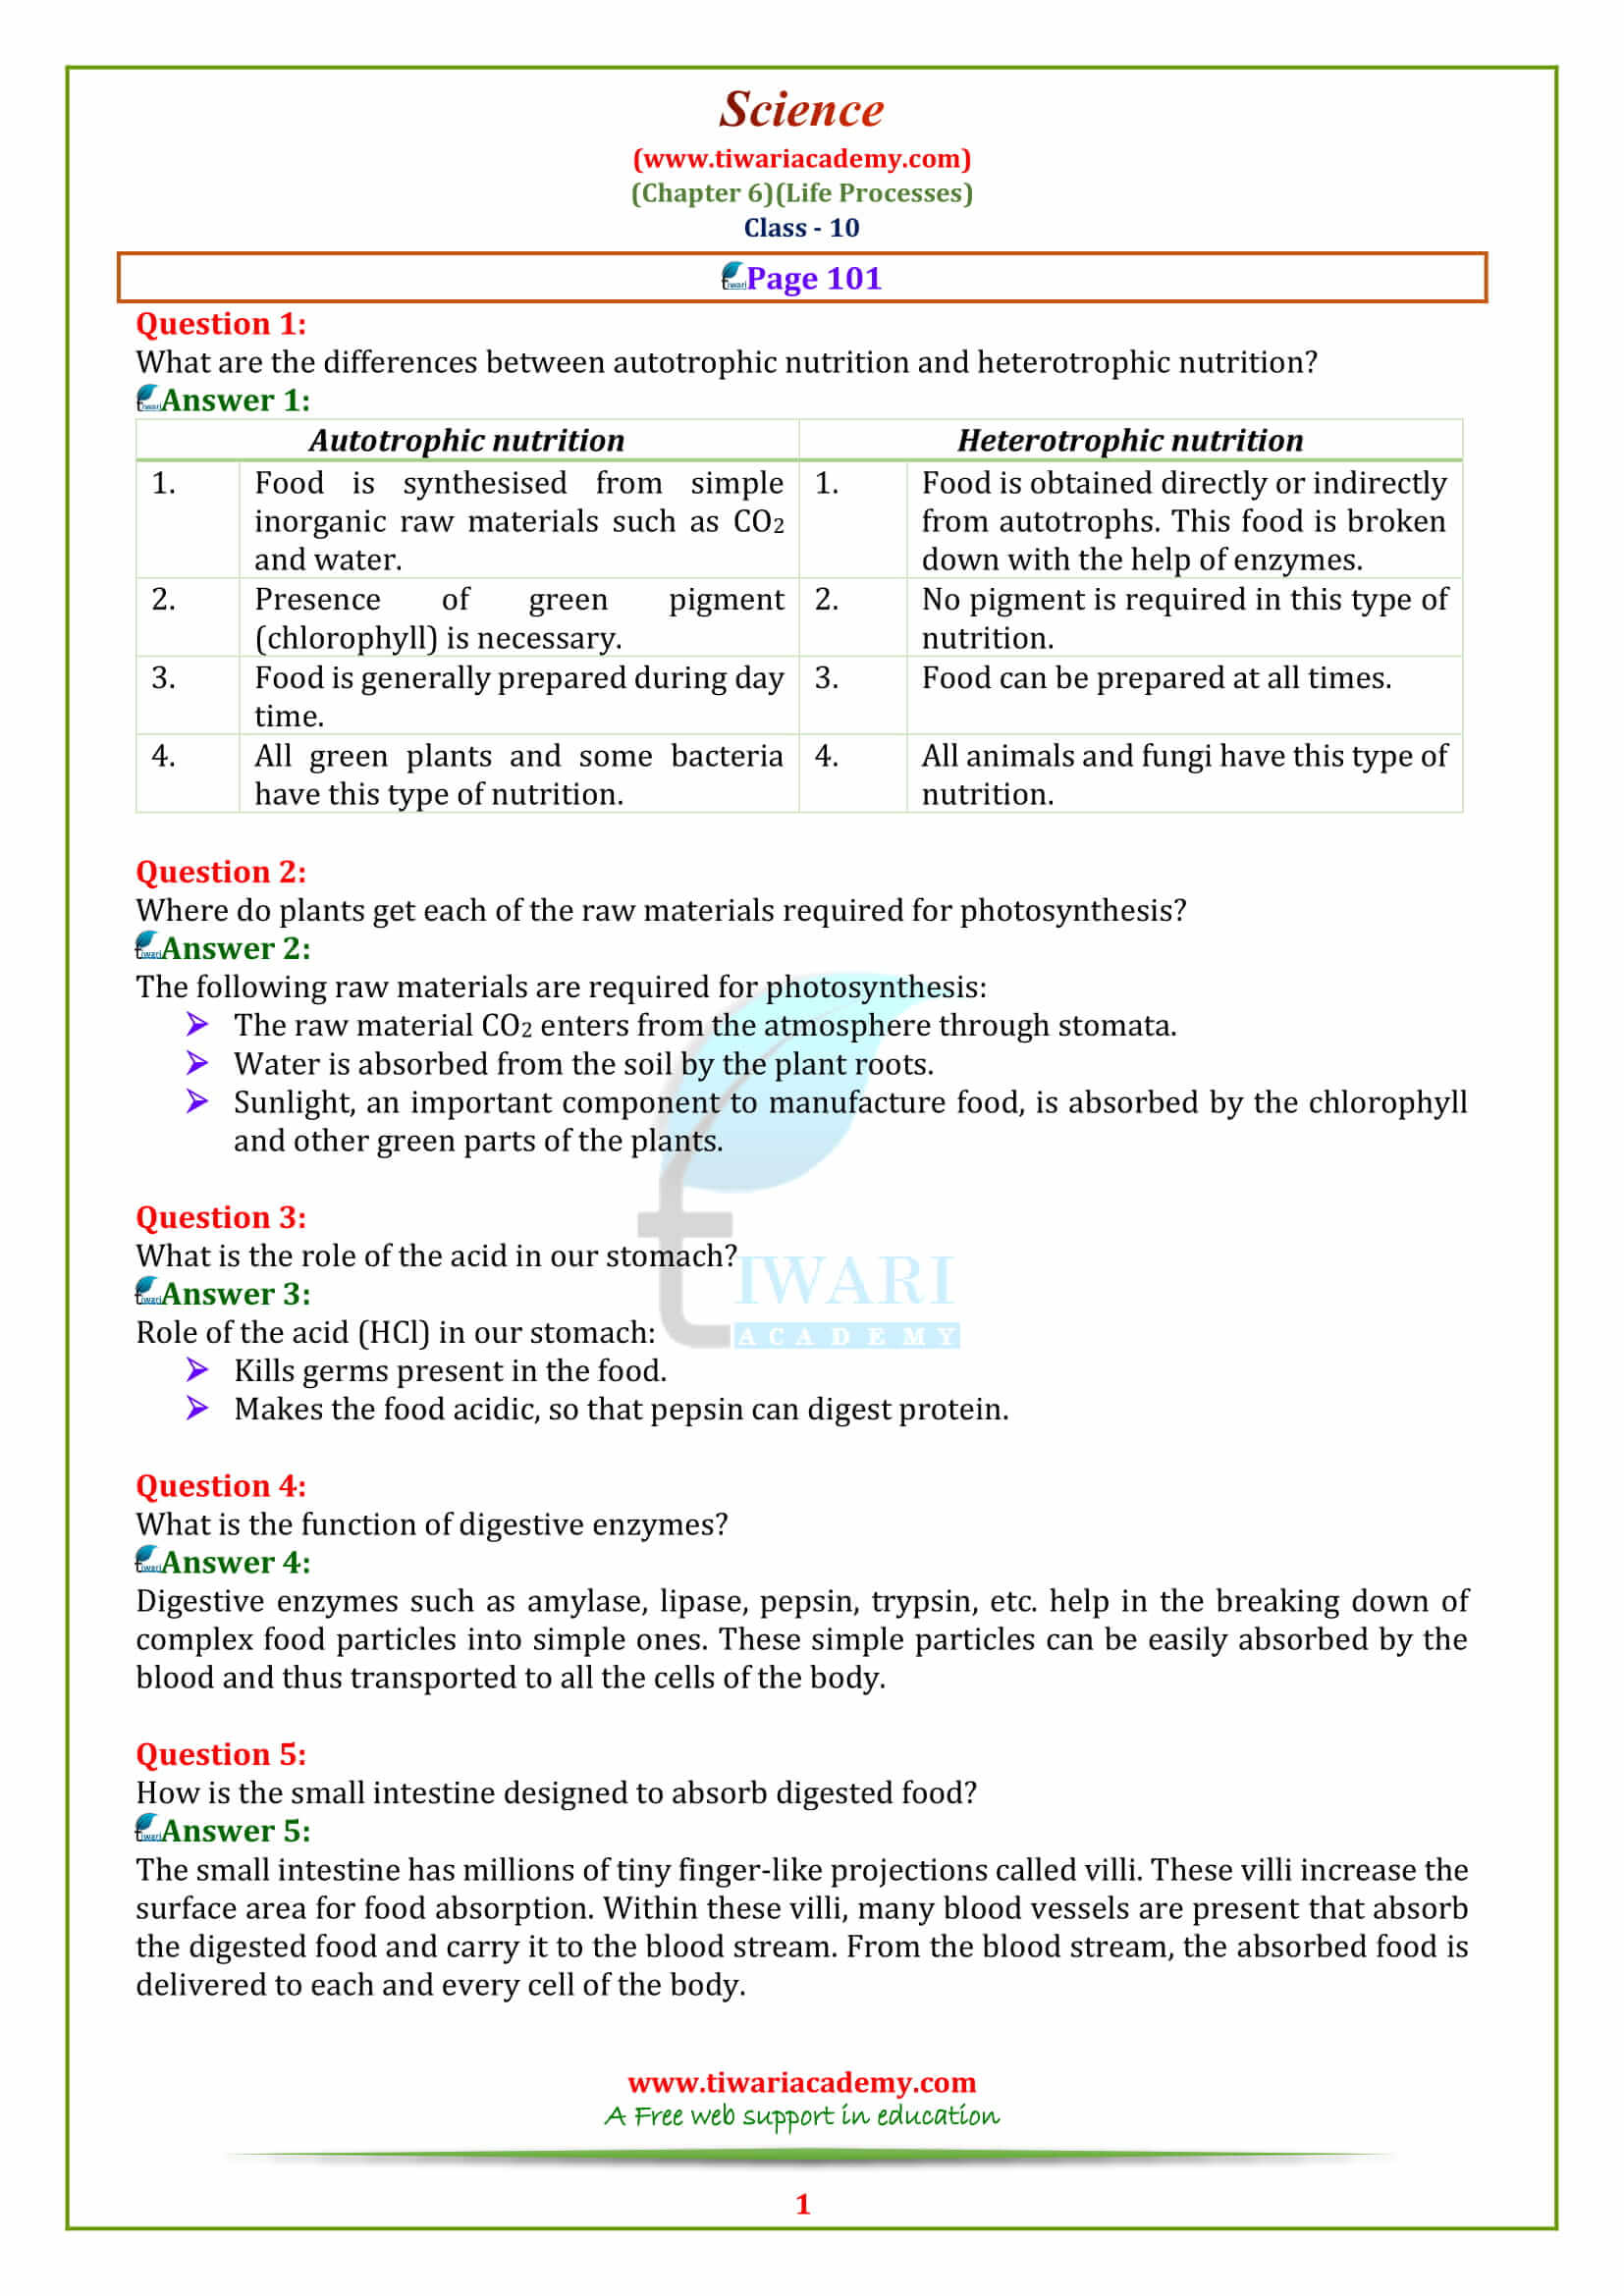 Class 10 Science Chapter 6 Life Processes Page 101 answers